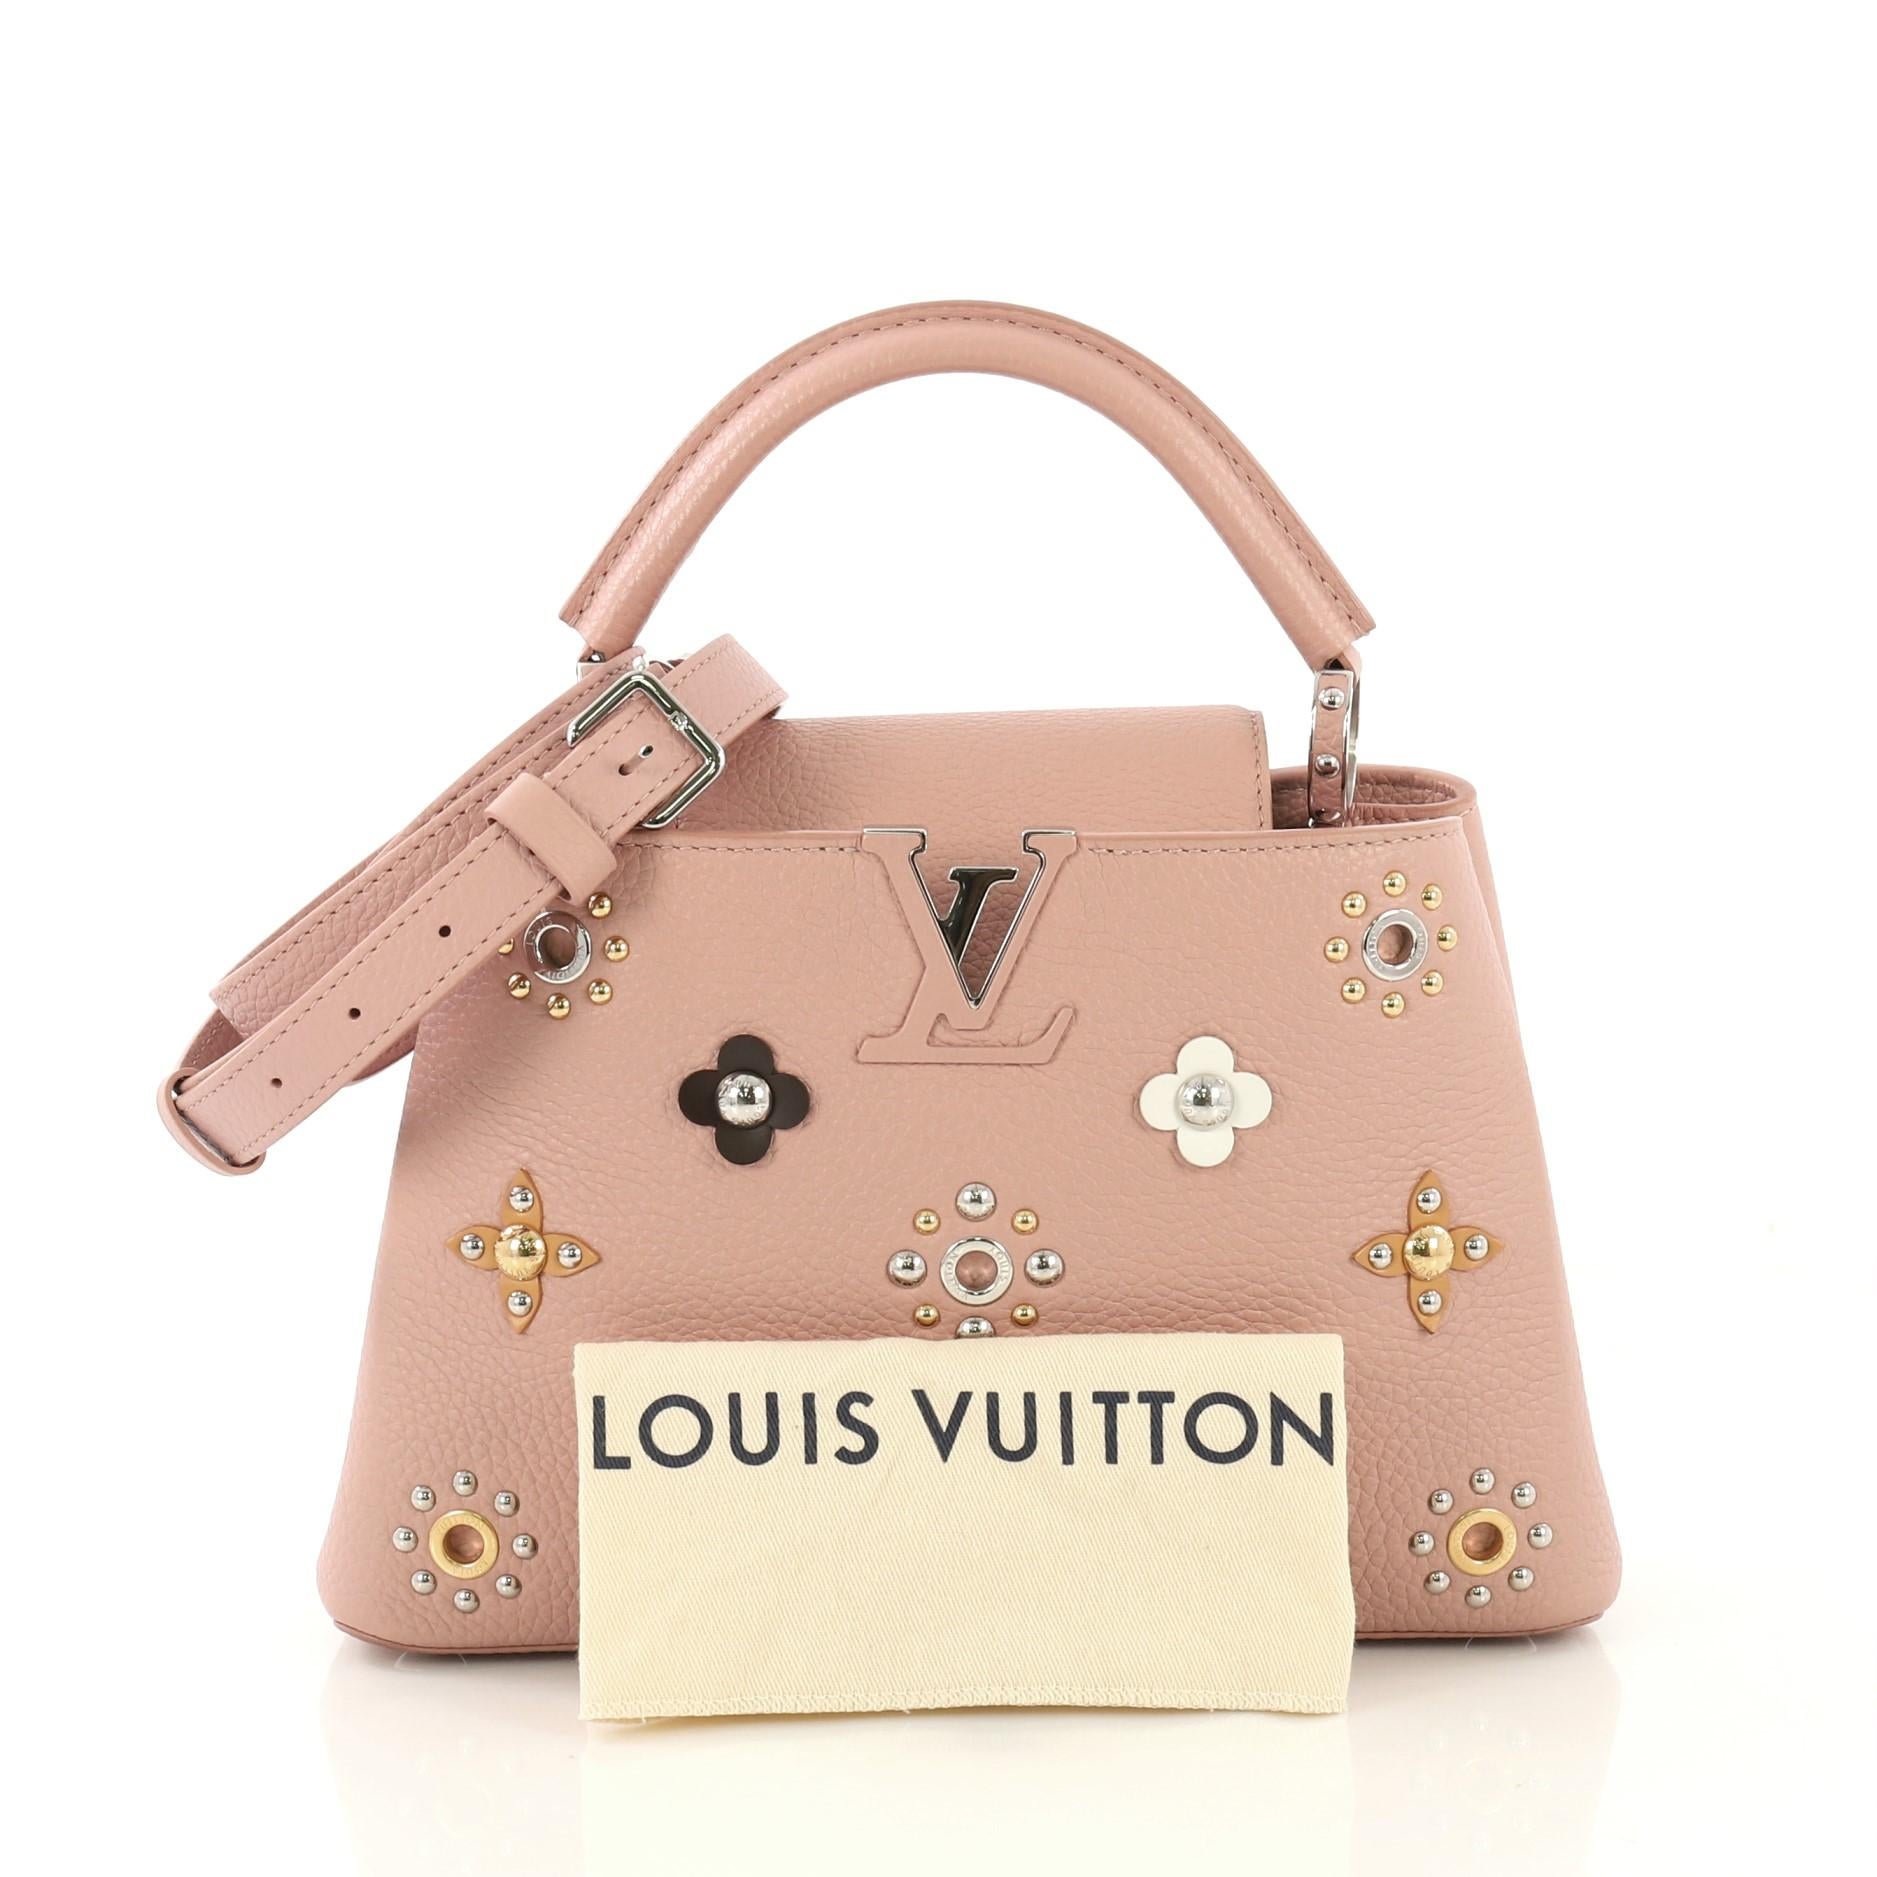 This Louis Vuitton Capucines Handbag Leather with Embellished Detail BB, crafted from pink leather with embellished detail, features a single loop leather handle with jewel-like rings, frontal flap with classic monogram flower, and silver-tone